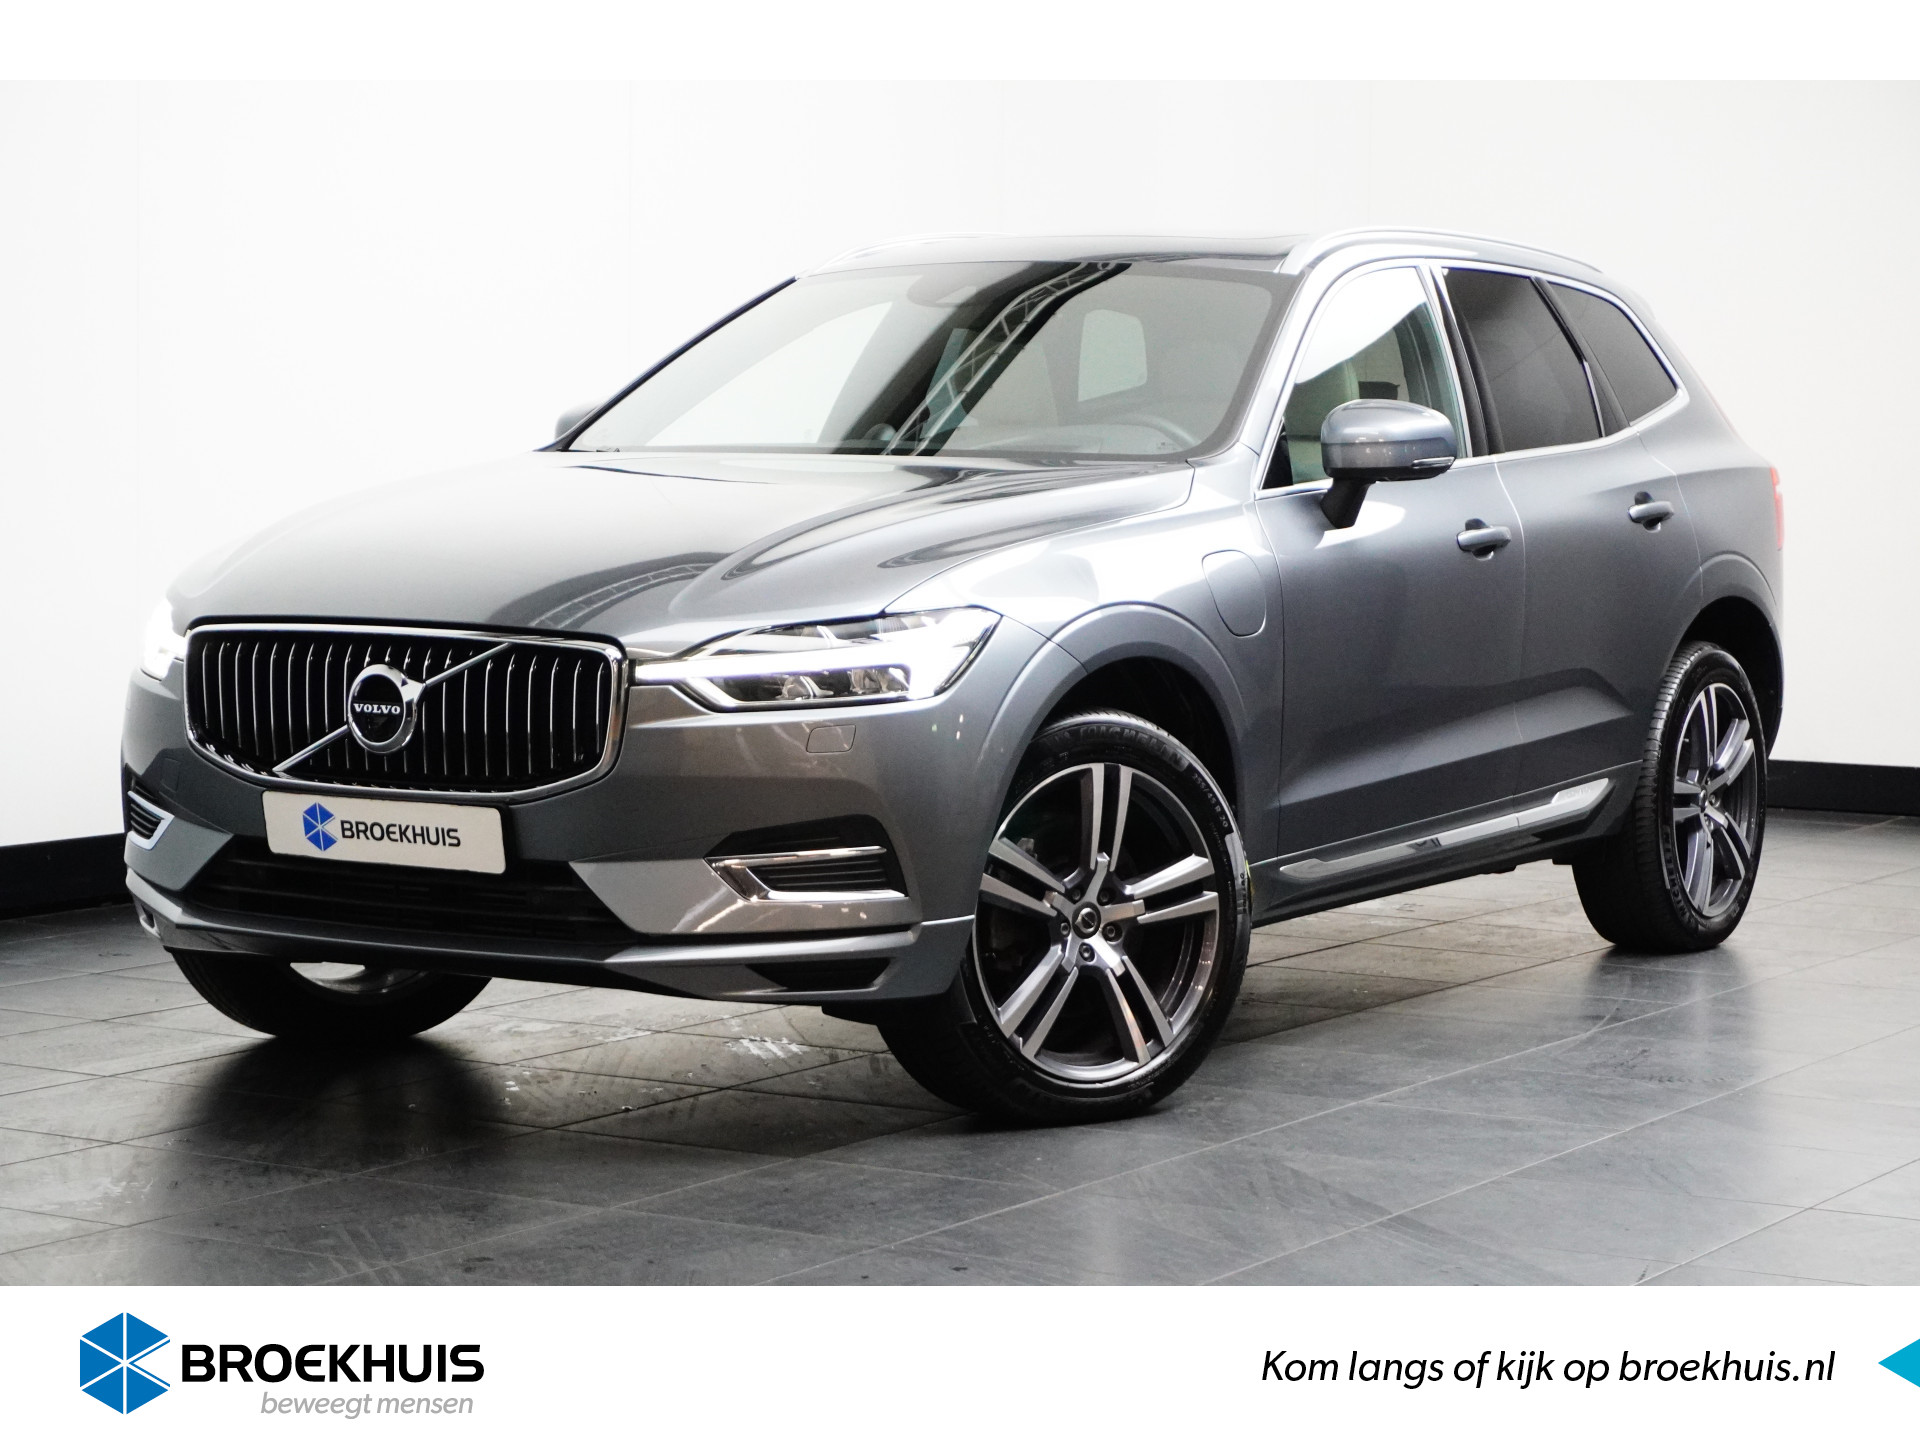 Volvo XC60 Recharge T6 AWD Inscription | Lounge Pack | Lightning Pack | Climate Pro Pack | Bowers & Wilkins audio | Luchtvering | Trekhaak bij viaBOVAG.nl